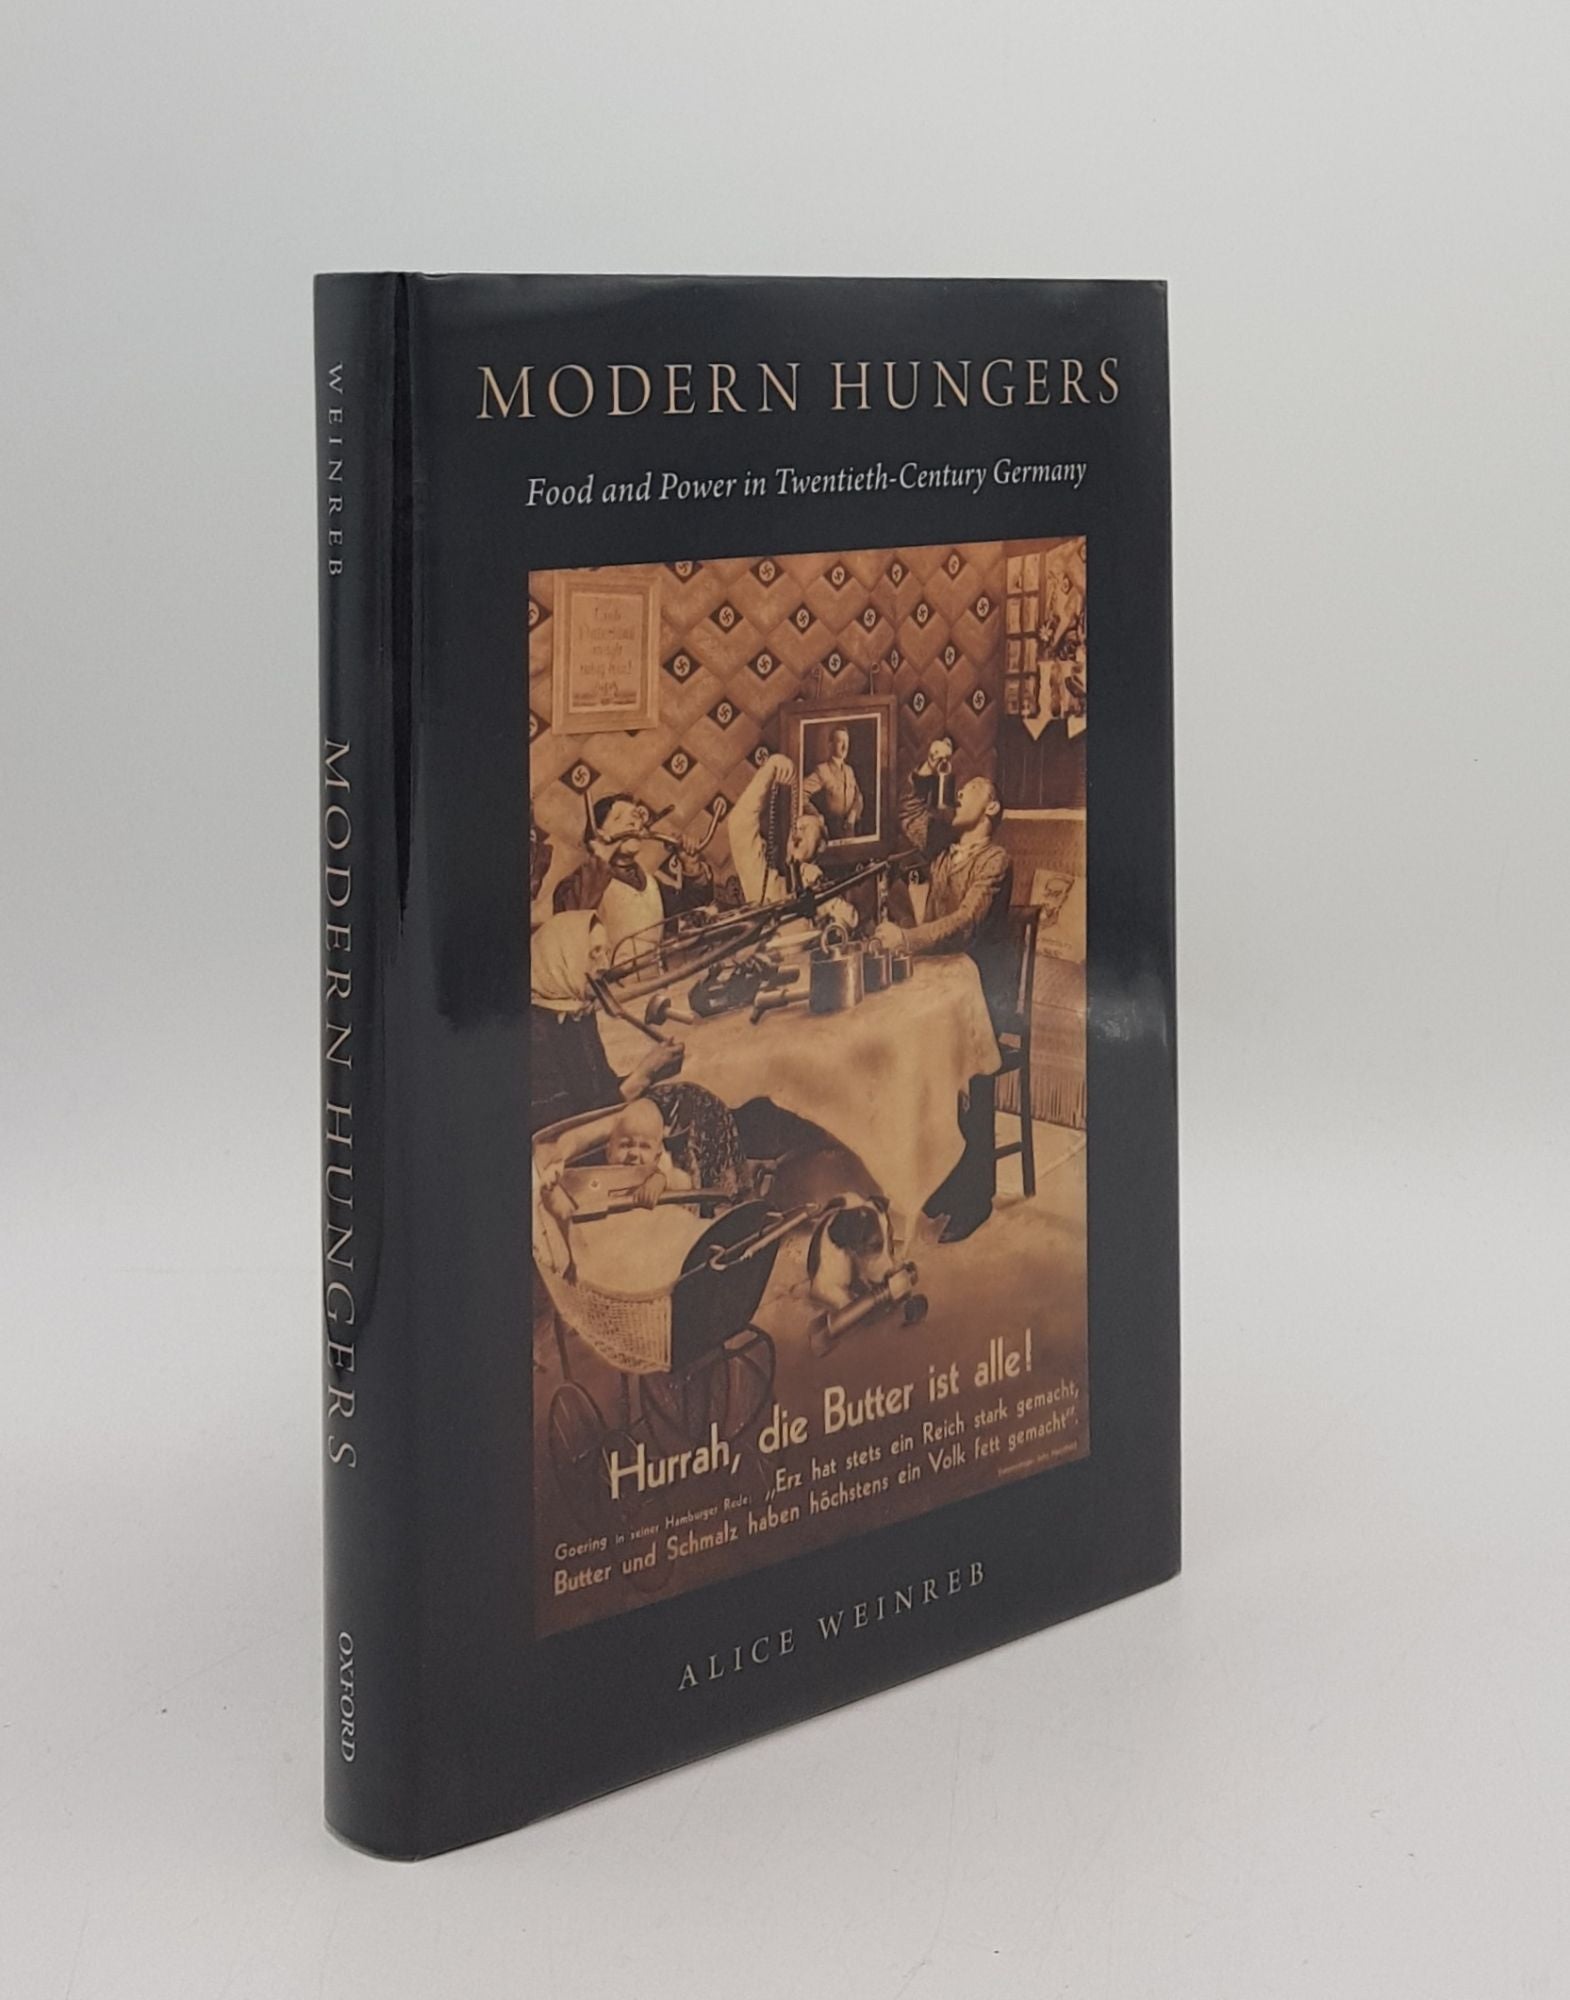 WEINREB Alice - Modern Hungers Food and Power in Twentieth-Century Germany